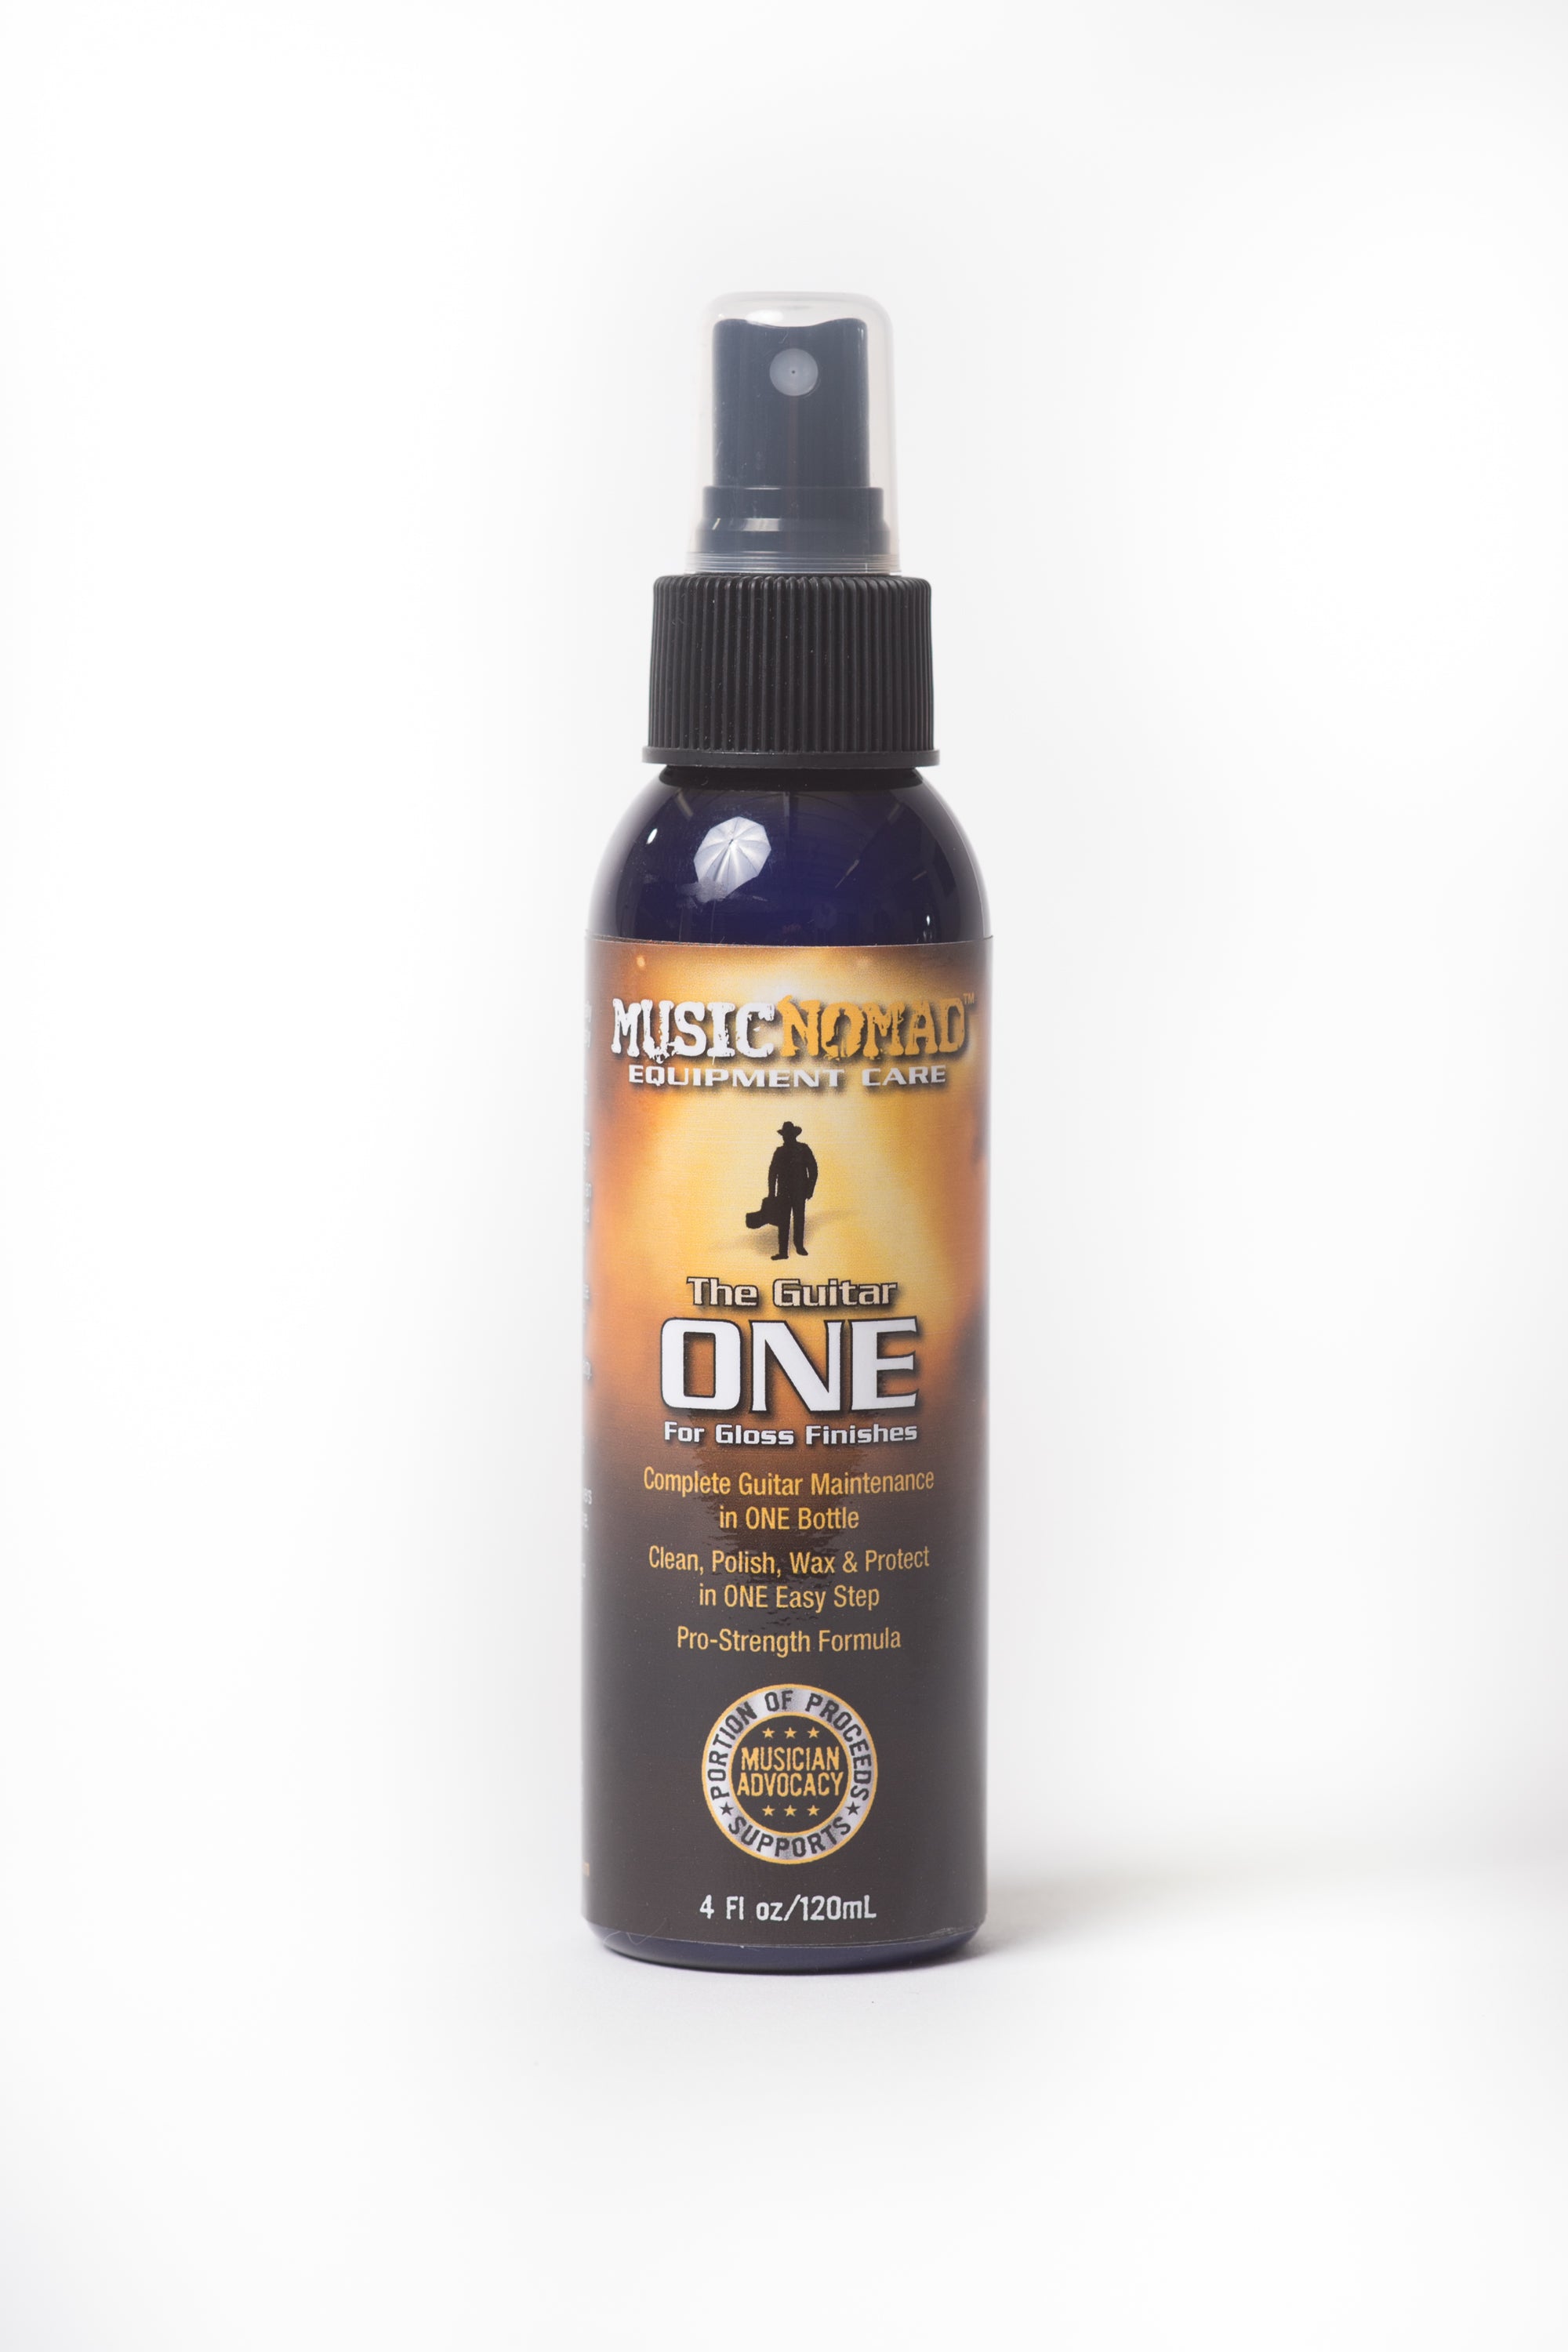 Music Nomad The Guitar "ONE" - All in 1 Cleaner, Polish, Wax for Gloss Finishes - 4 fl. oz. MN103 - HIENDGUITAR   musicnomad musicnomad